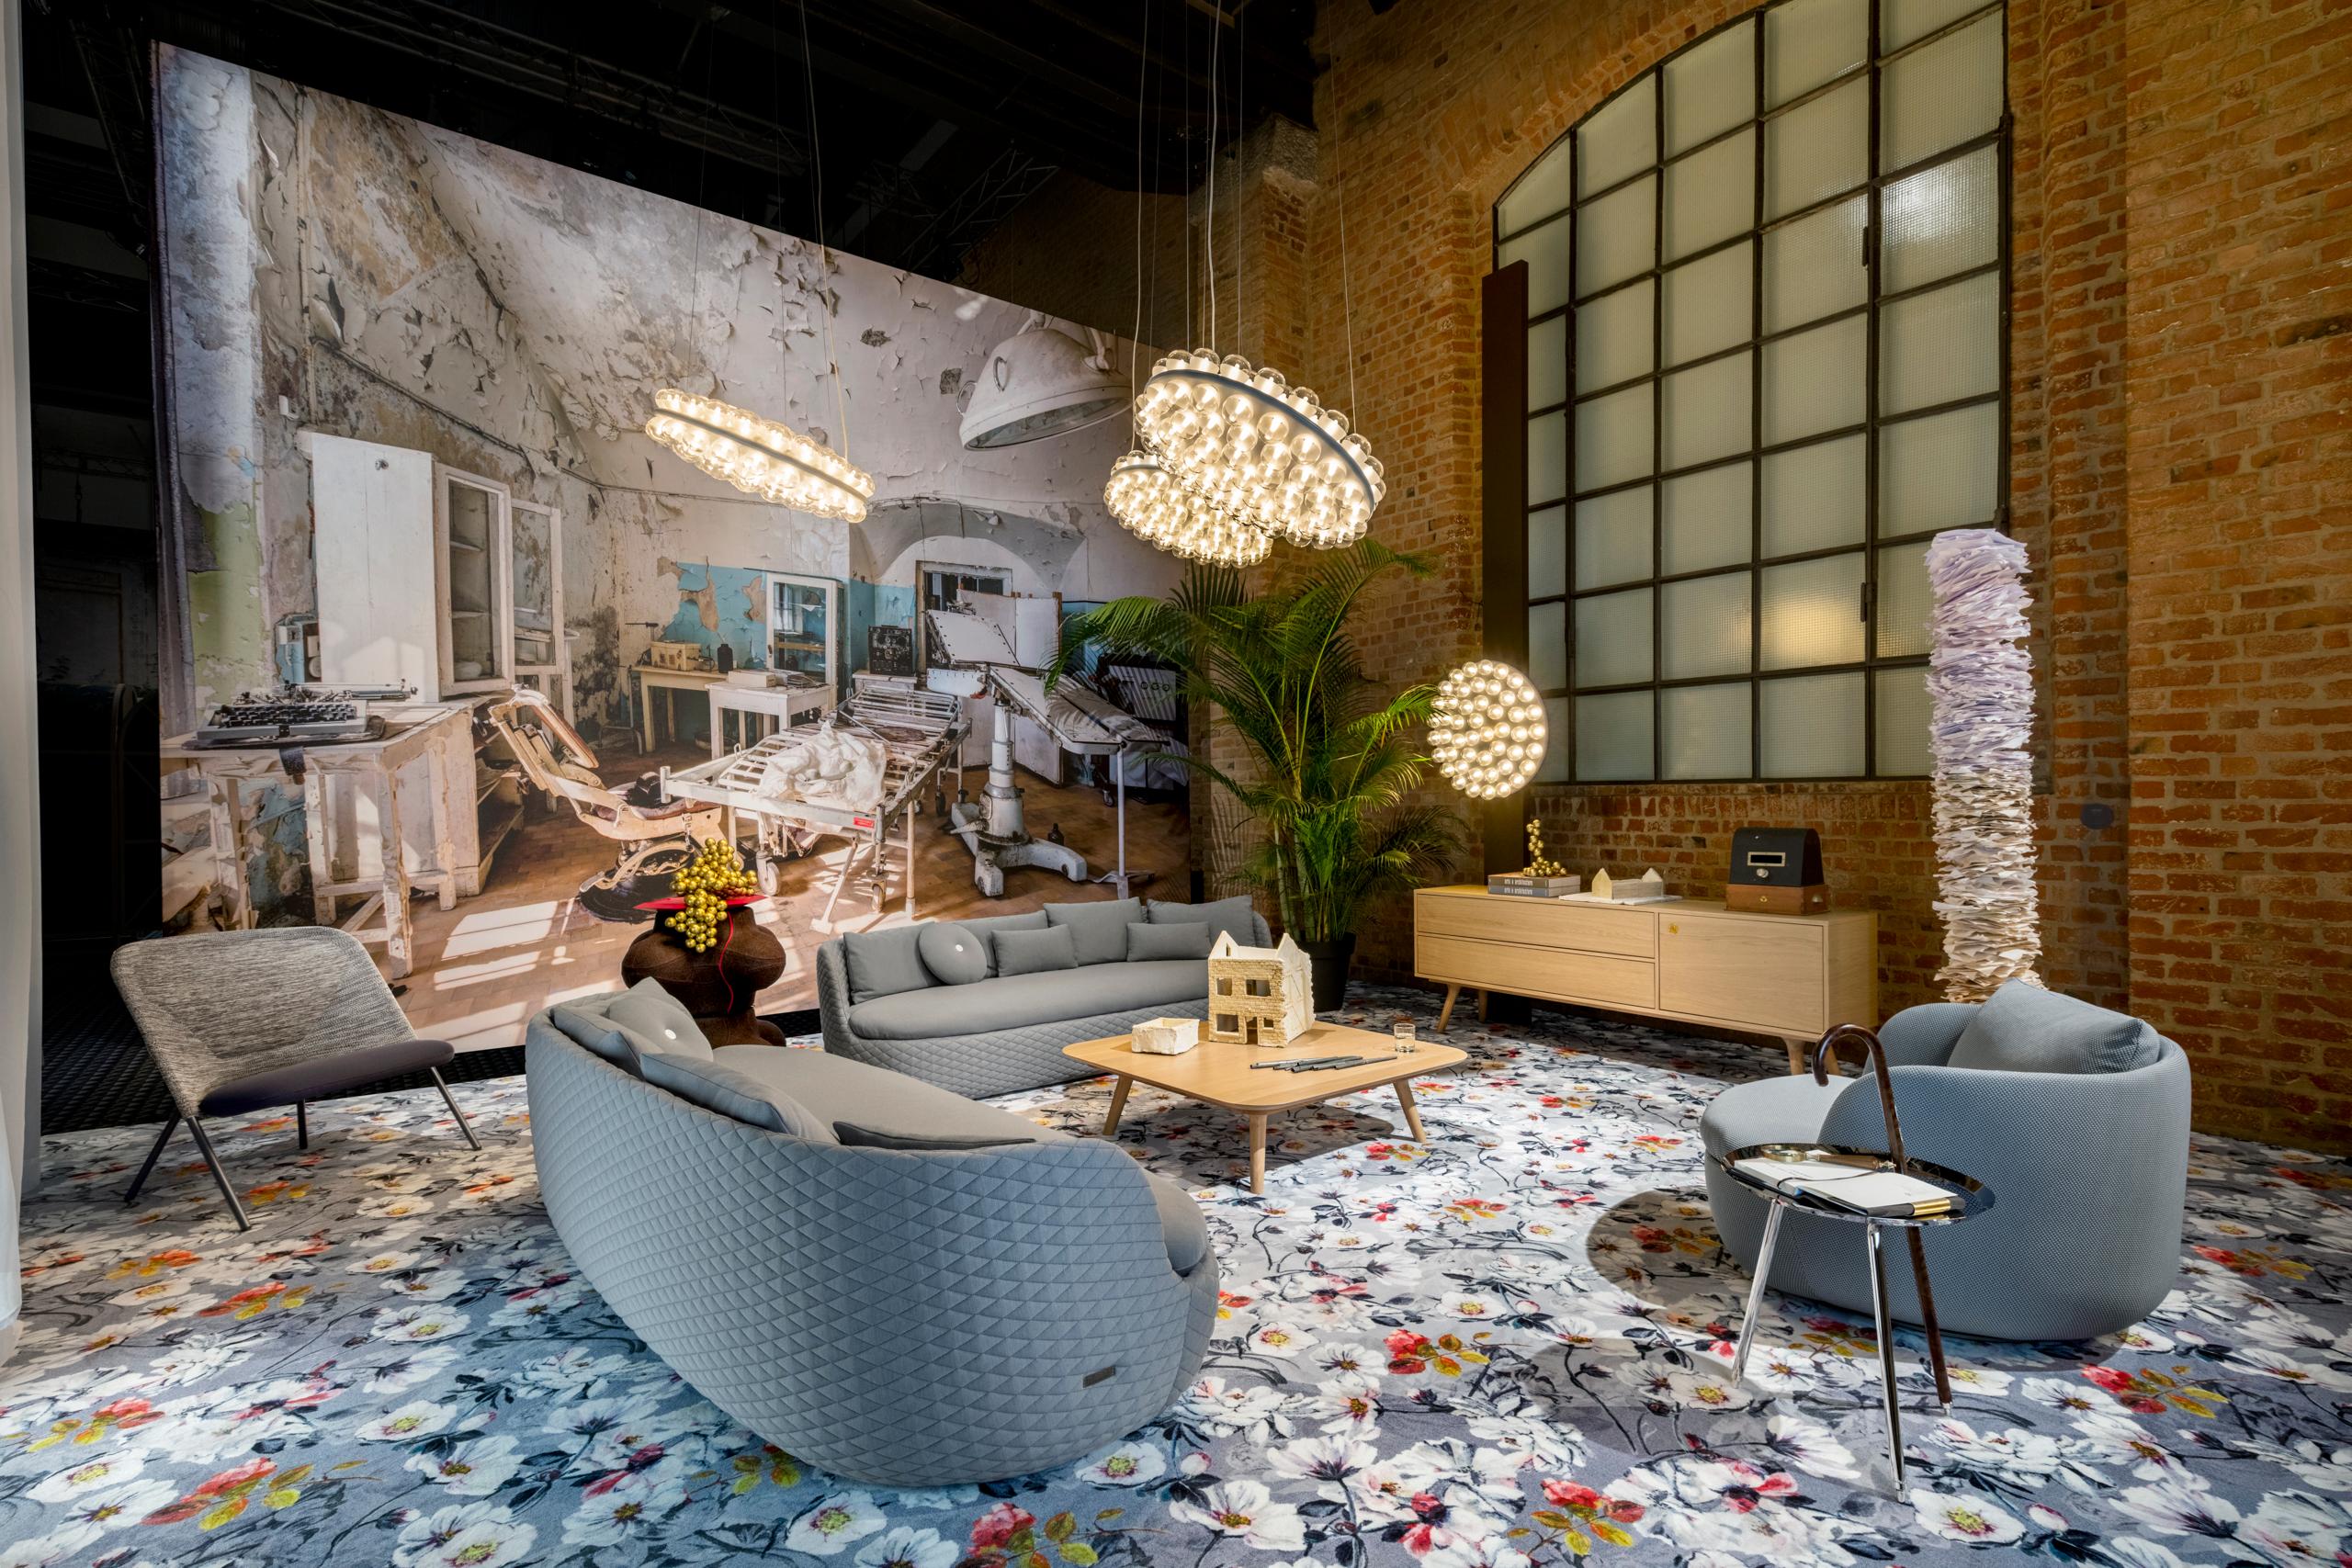 Moooi Pomander Noir Rug in Low Pile Polyamide by Tricia Guild

Tricia Guild O.B.E is the creative force of Designers Guild and has been at the forefront of interior design since starting the company in the early 70’s. Internationally renowned for